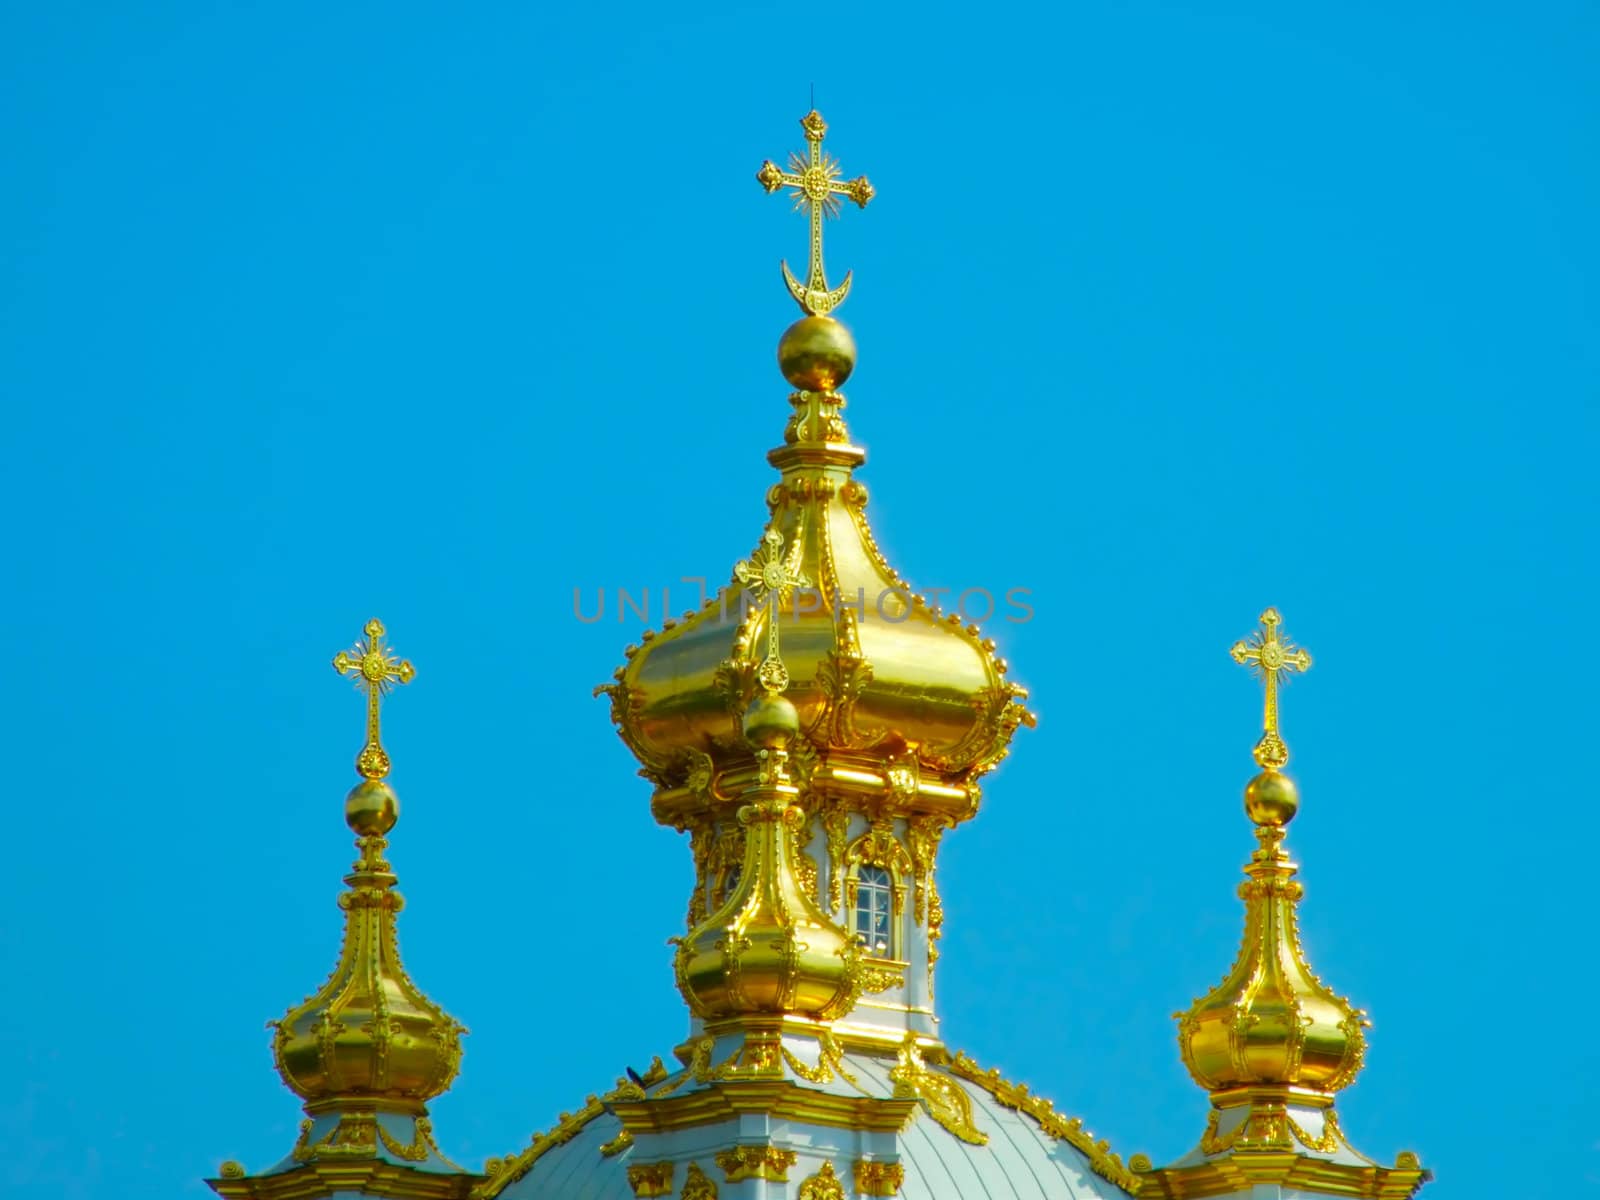 Domes of the church case of the Big Peterhof palace